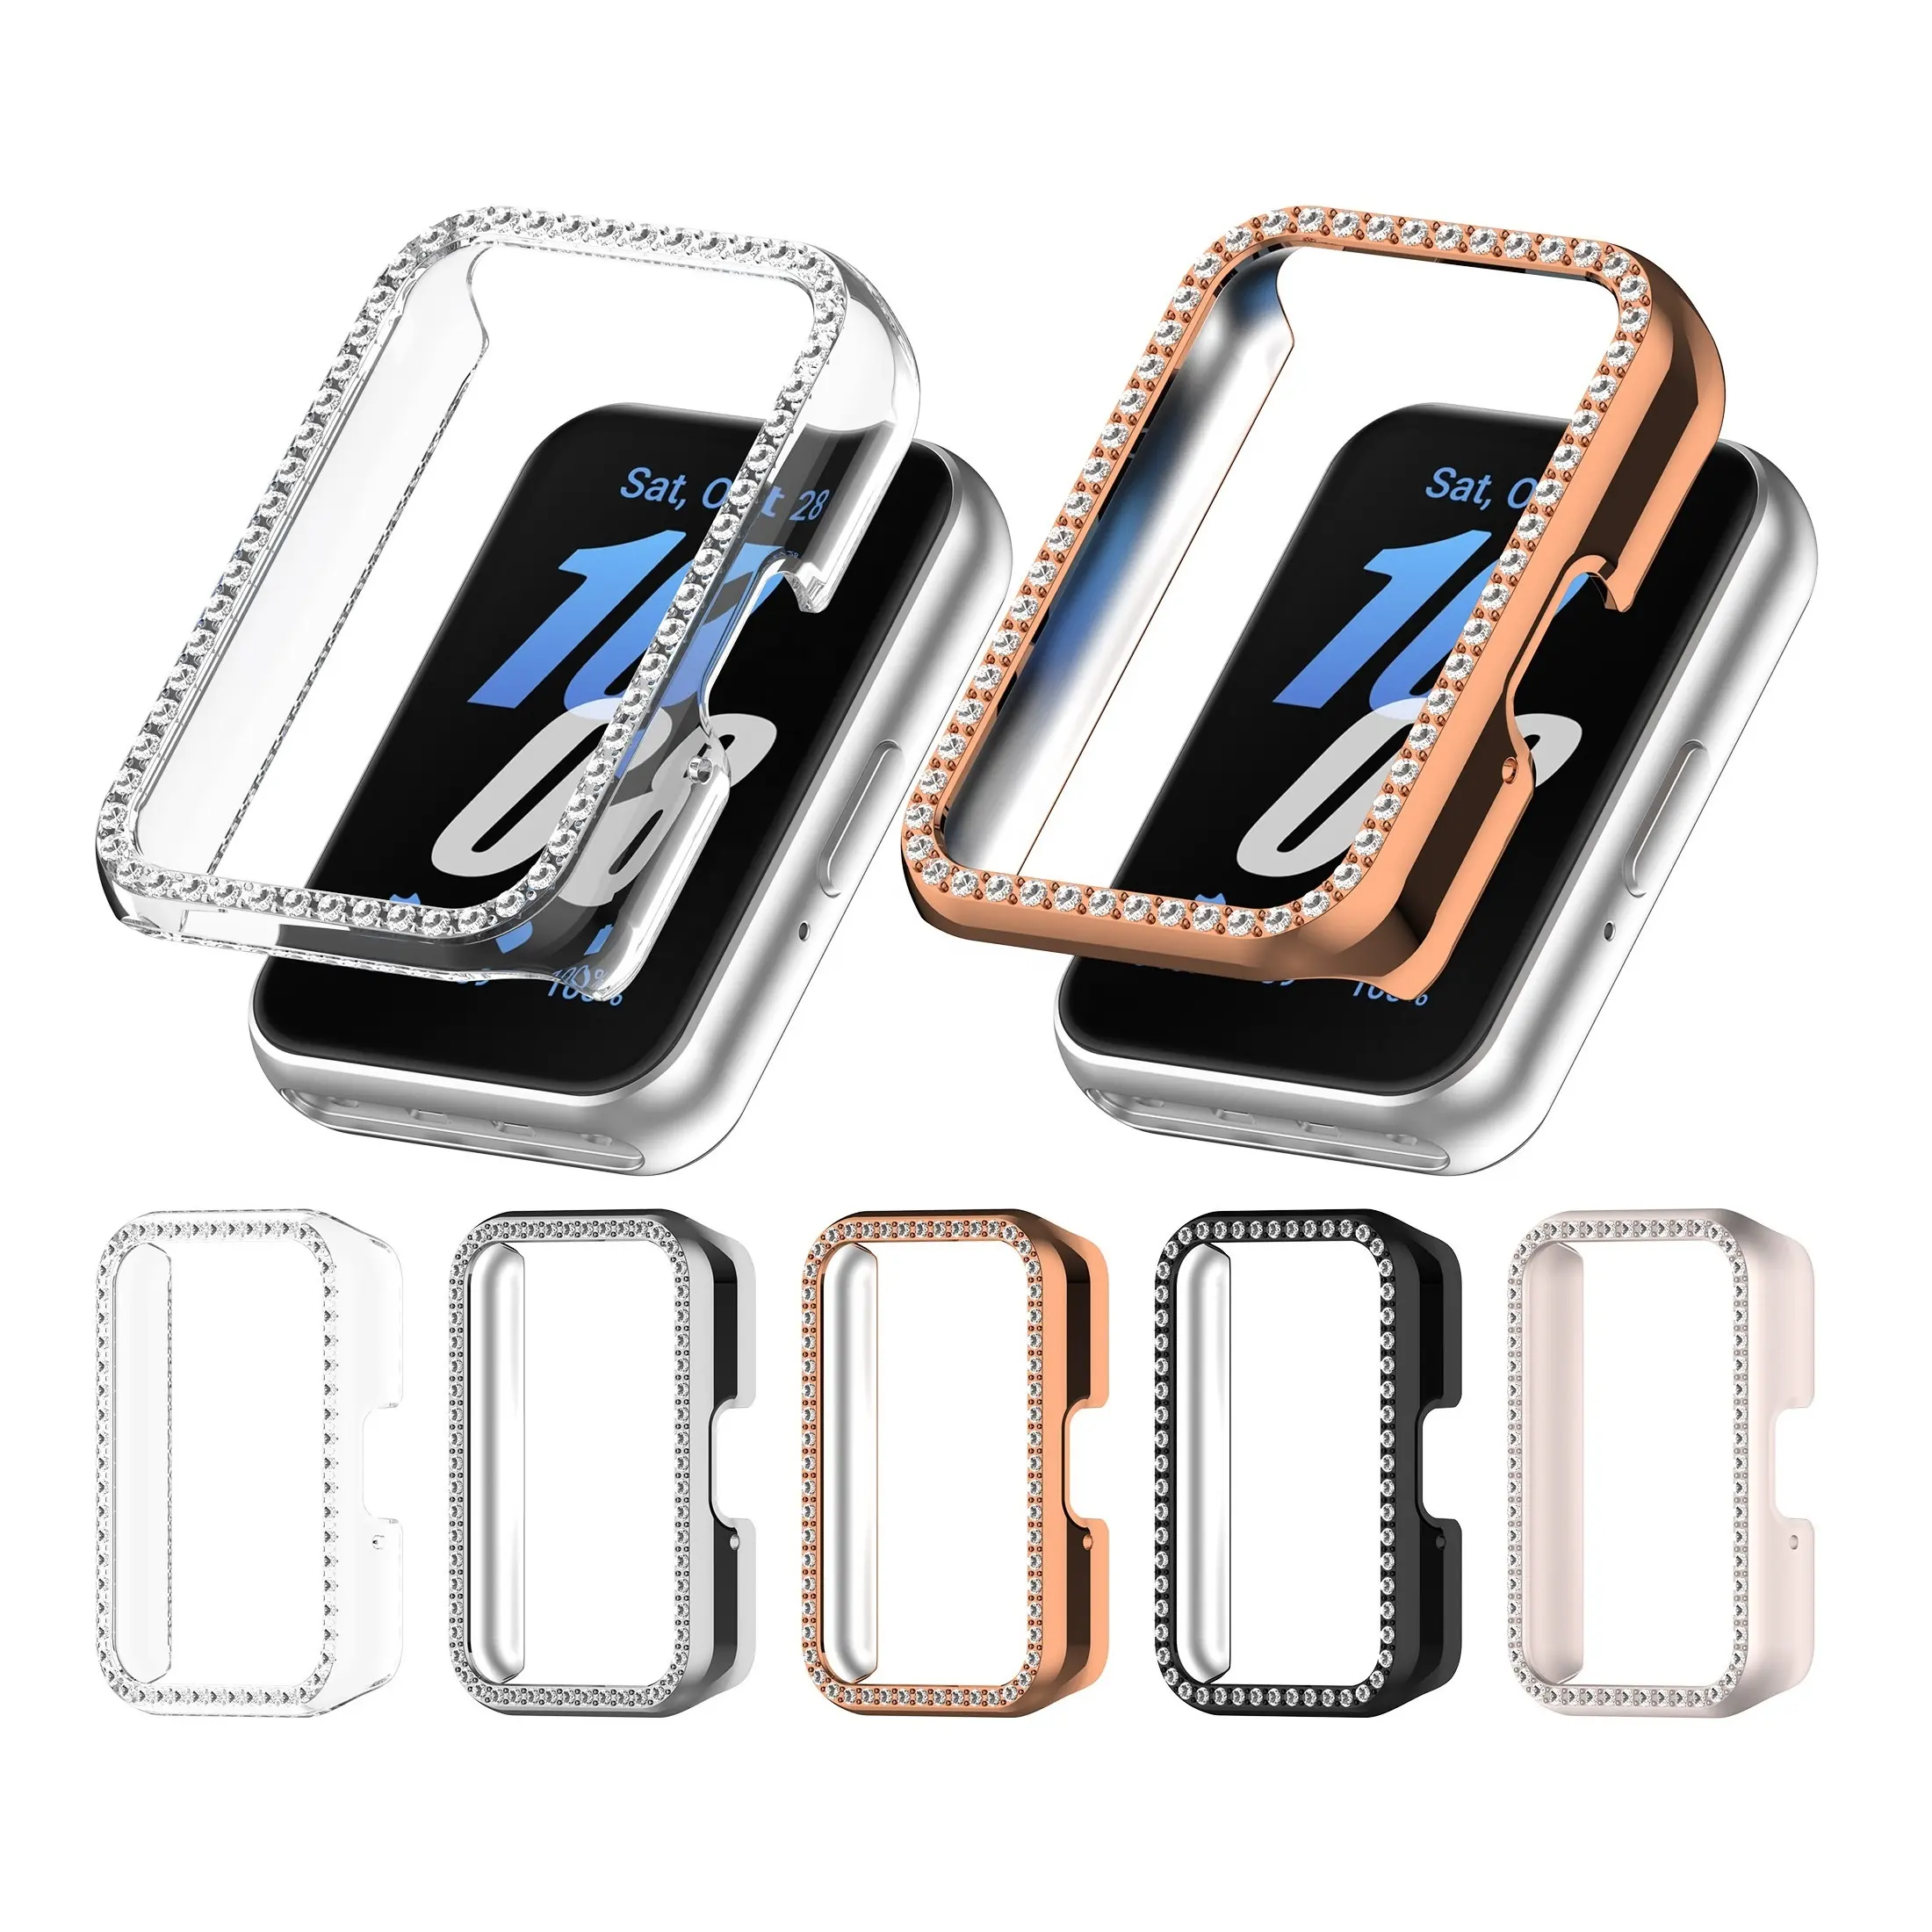 PC Diamonds Bumper Hollow Protect Case For Samsung Galaxy Fit3  Sm-R390  Half Cover For Galaxy Fit3 PC+Diamonds Protective Cases